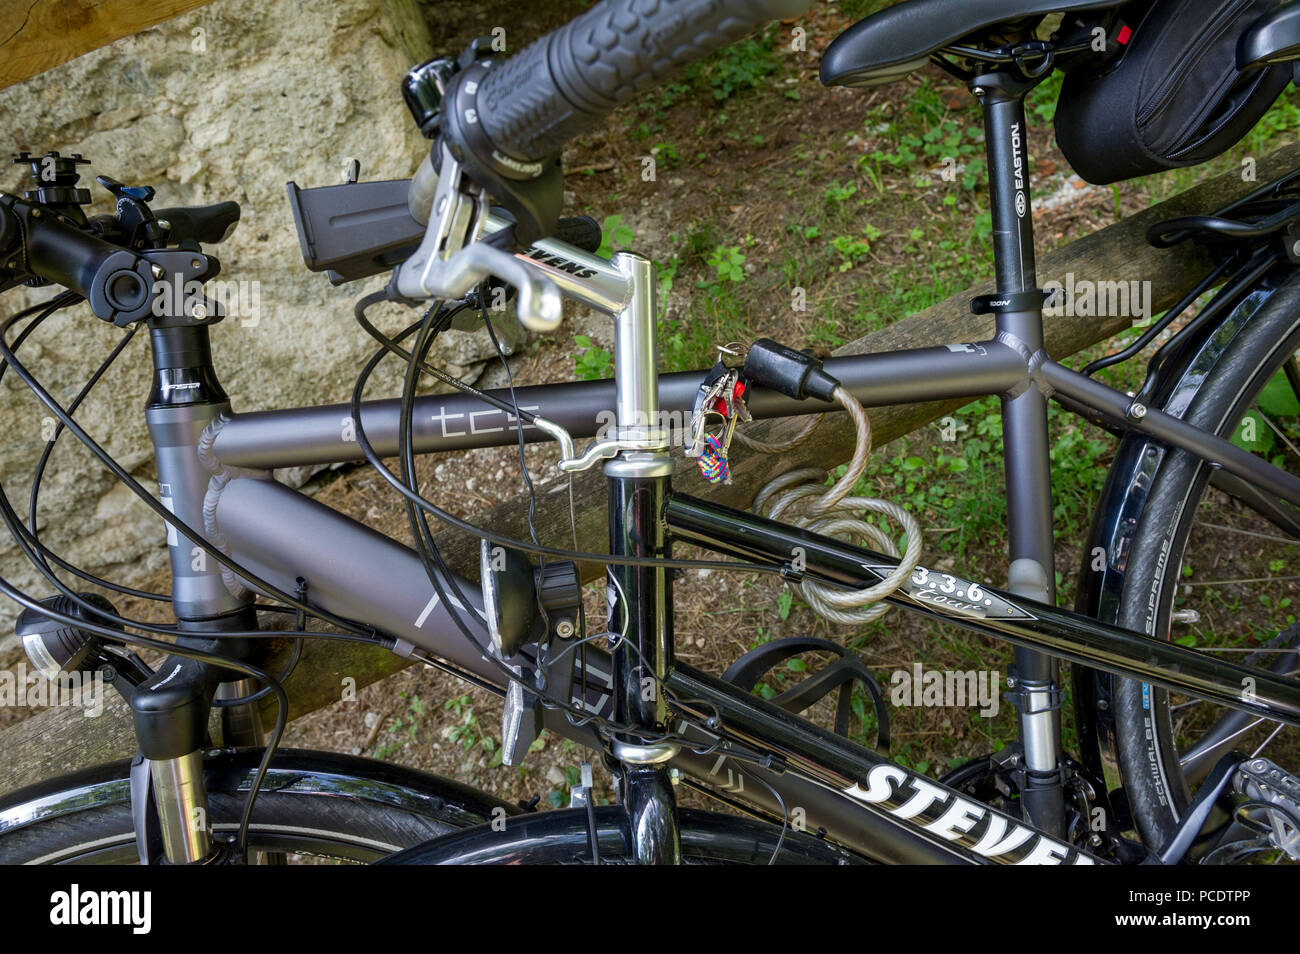 Bikes locked together with key still in the lock. Stock Photo